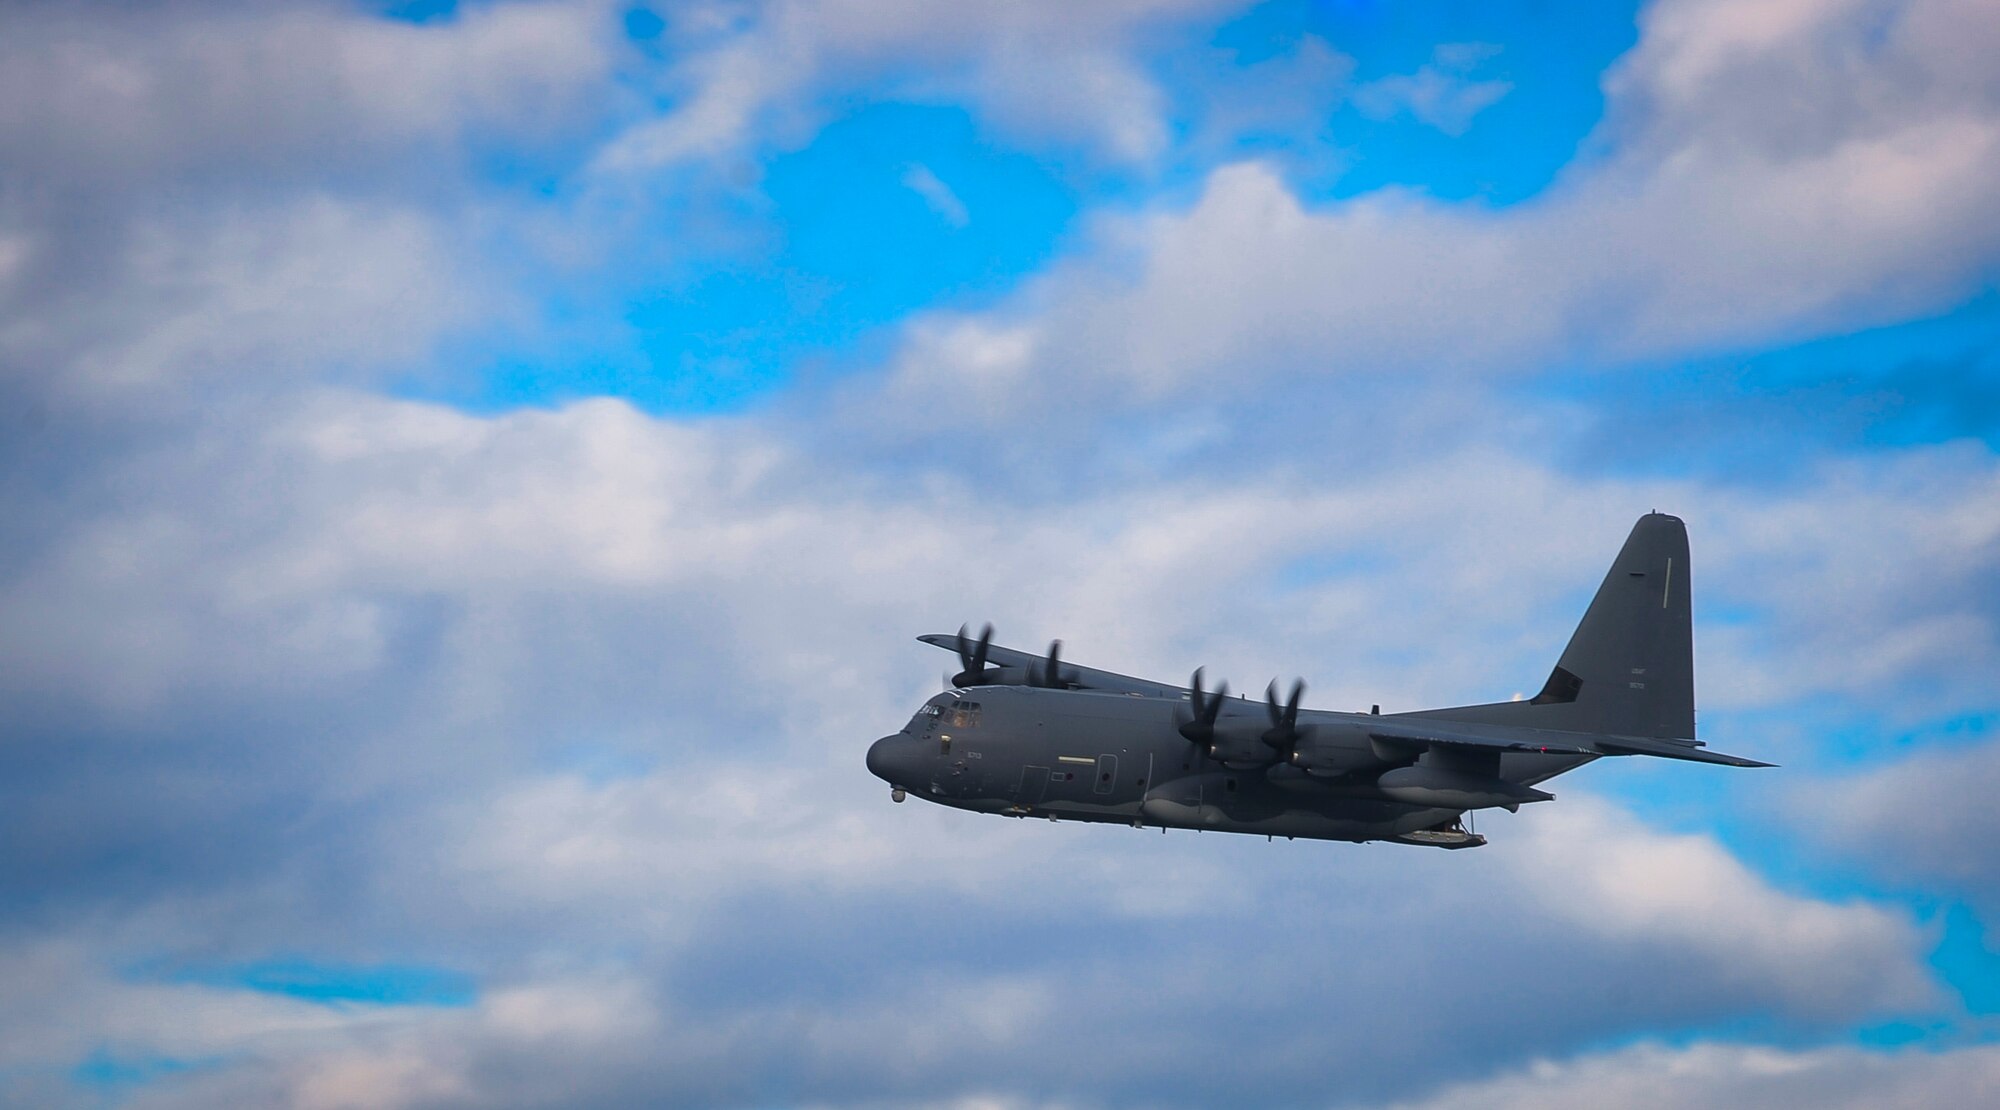 An MC-130H Combat Talon II performs a fly-by after dropping a rigid inflatable boat into the Gulf of Mexico during Maritime Craft Aerial Delivery Systems training, Nov. 12, 2015. MCADS enable special operation forces members to rapidly deploy anywhere around the world in a maritime environment. (U.S. Air Force photo by Senior Airman Meagan Schutter)